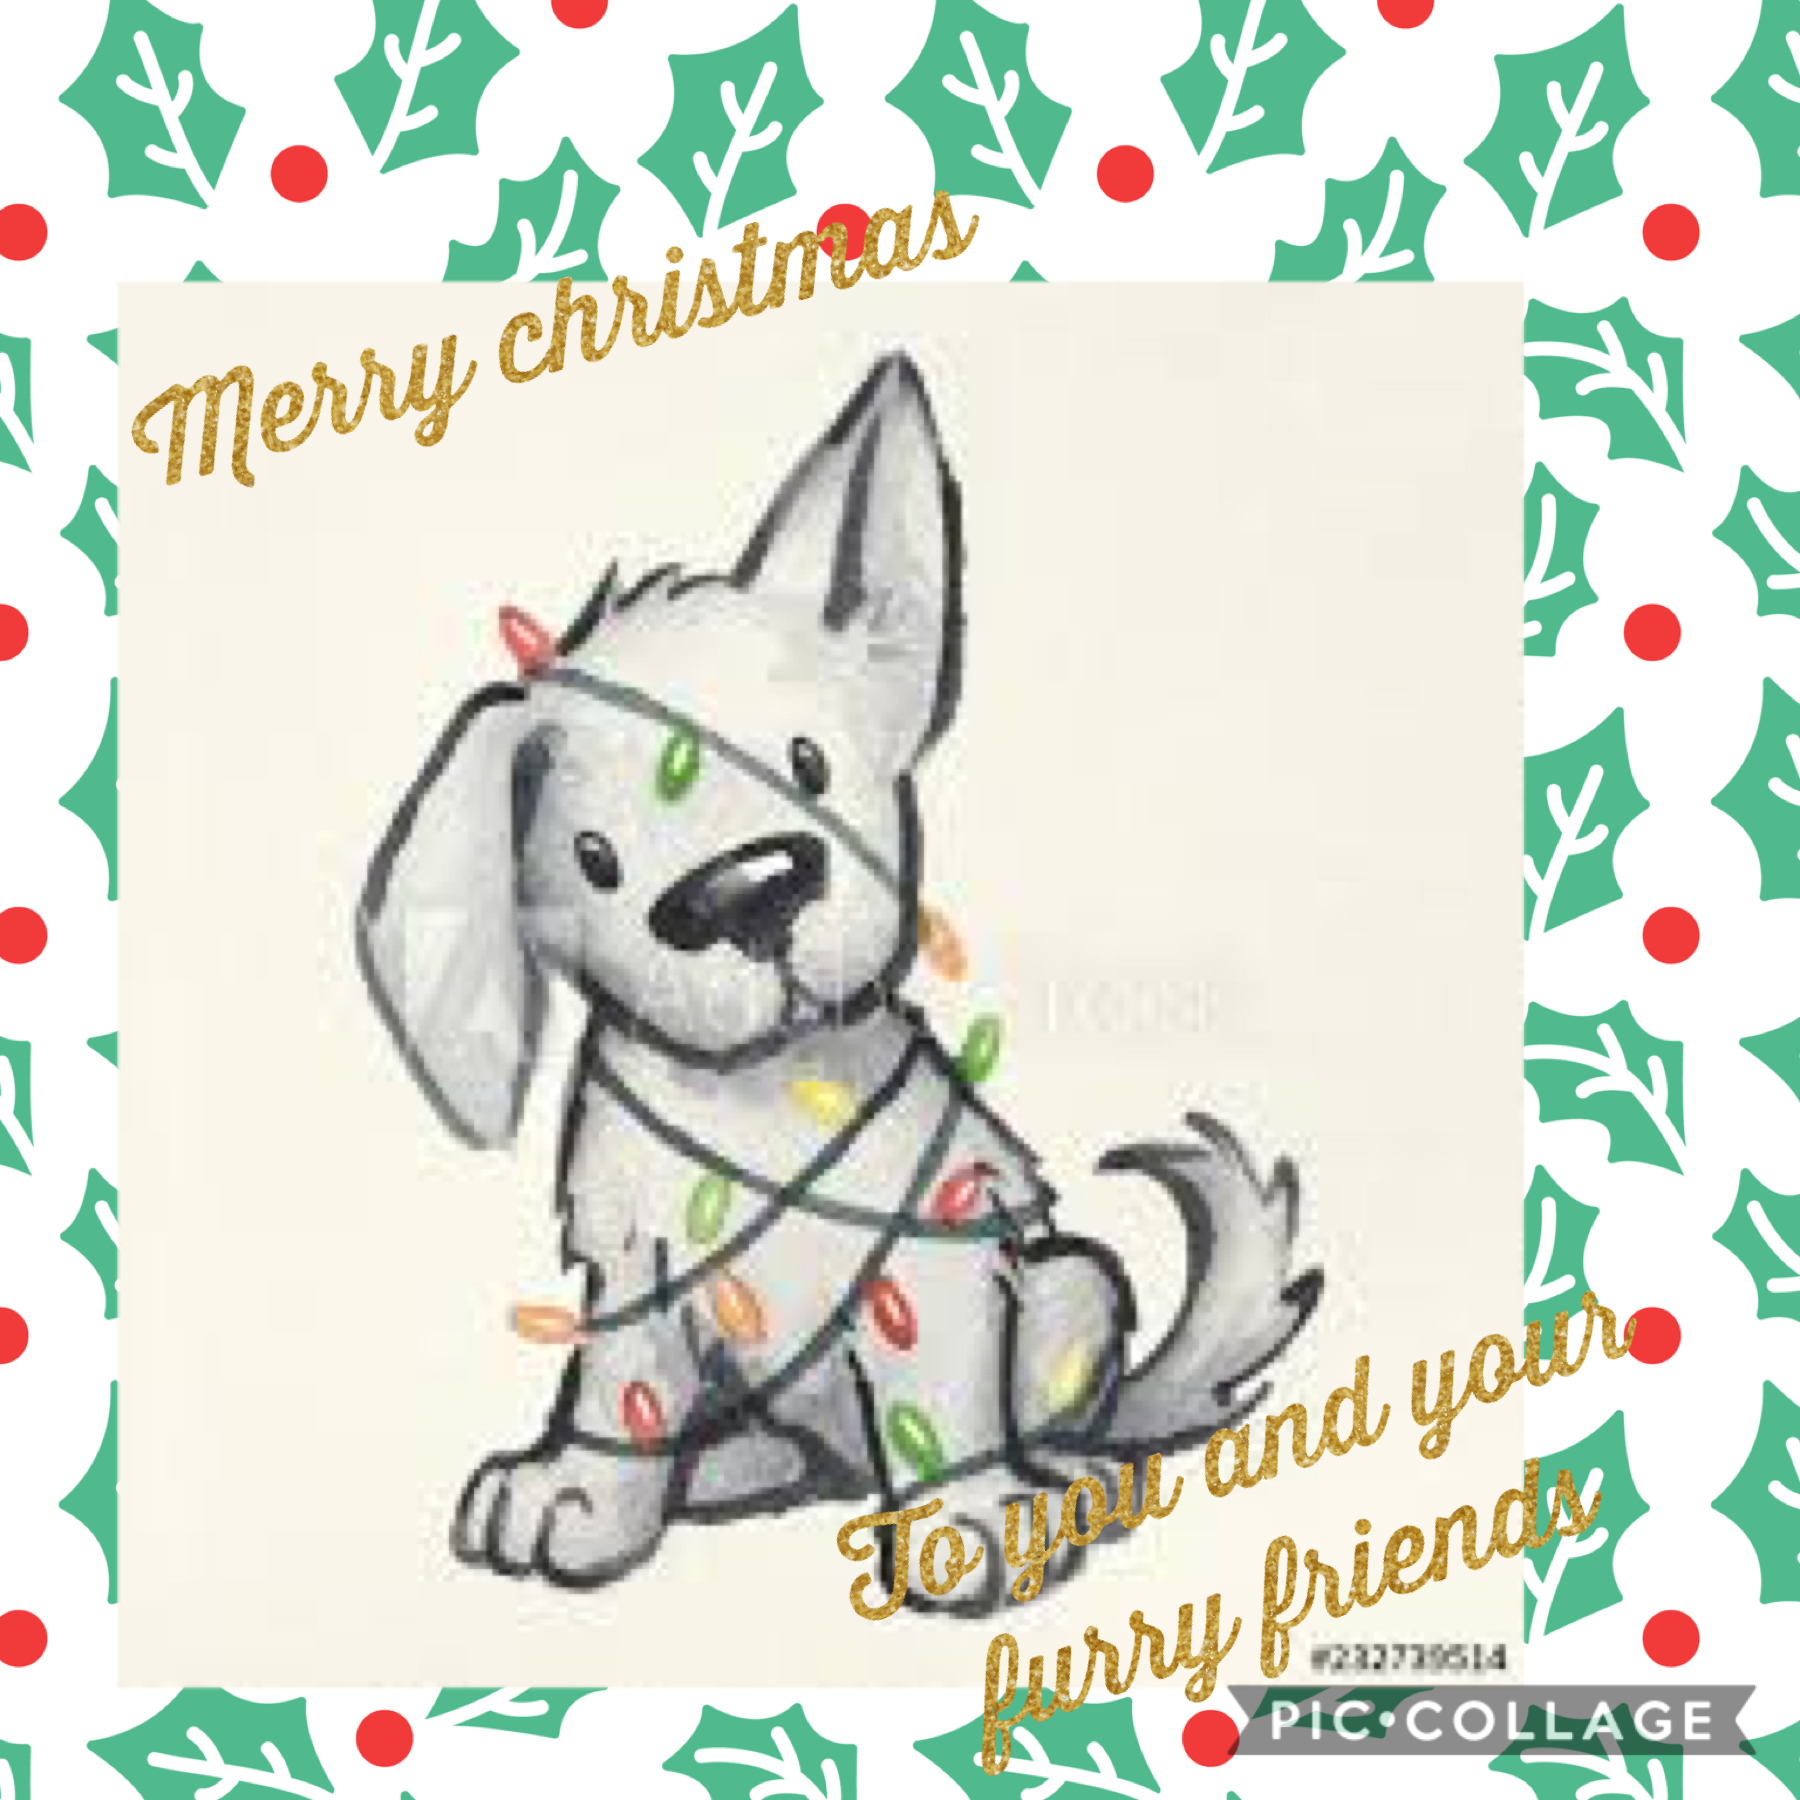 Wish you guys a merry christmas to you and your furry friends